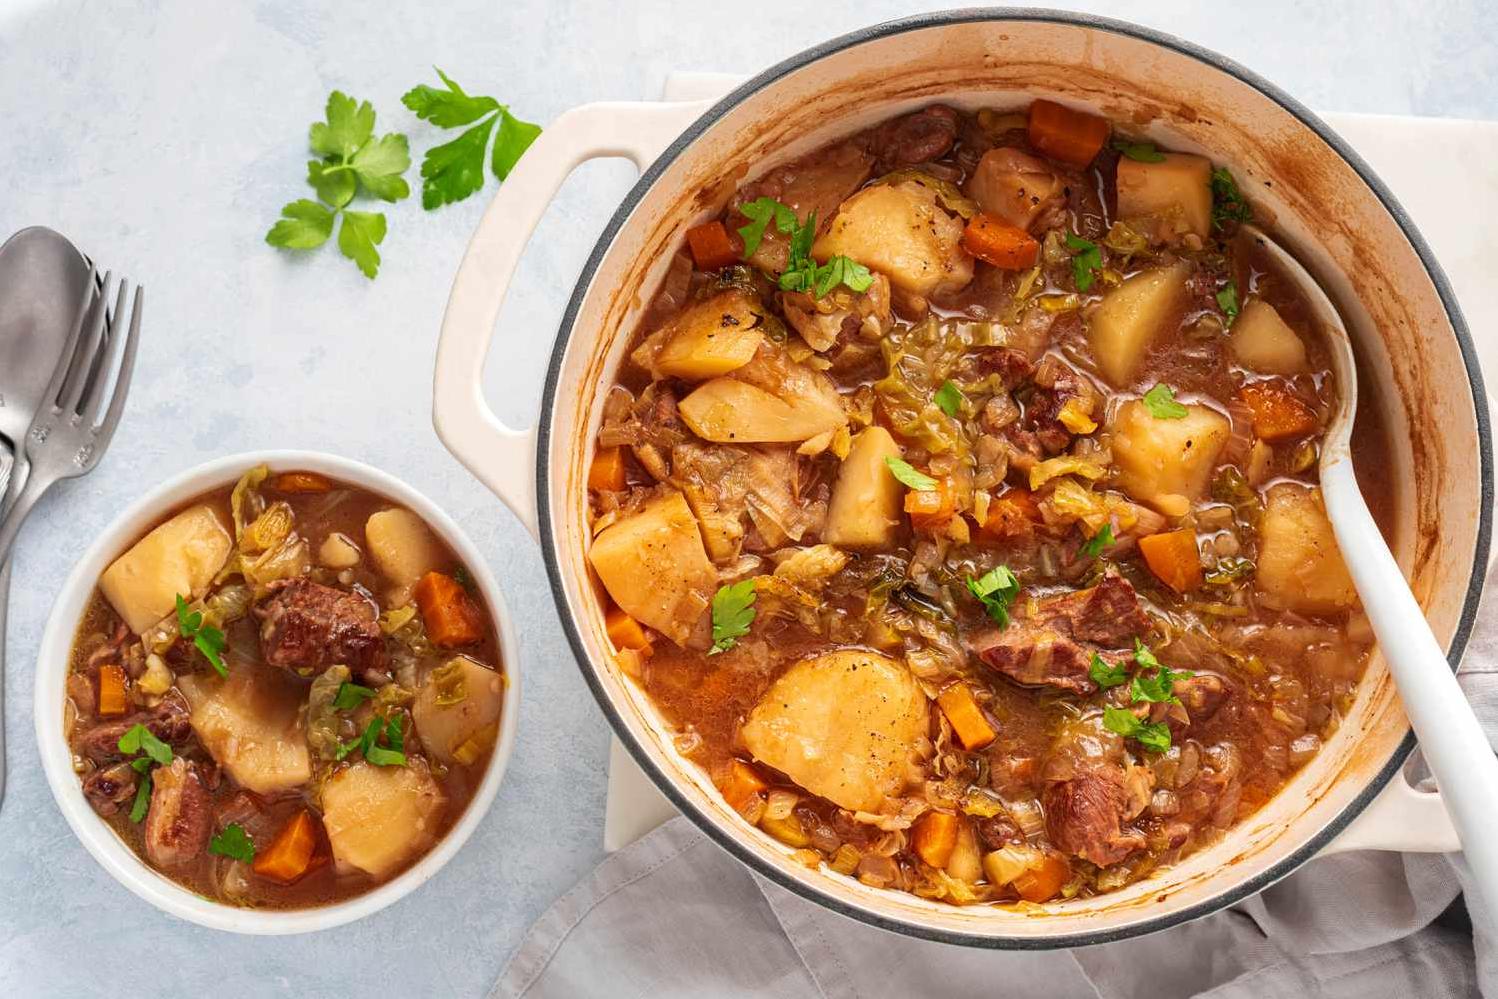  Simple ingredients, big flavors – that’s Irish stew for you.